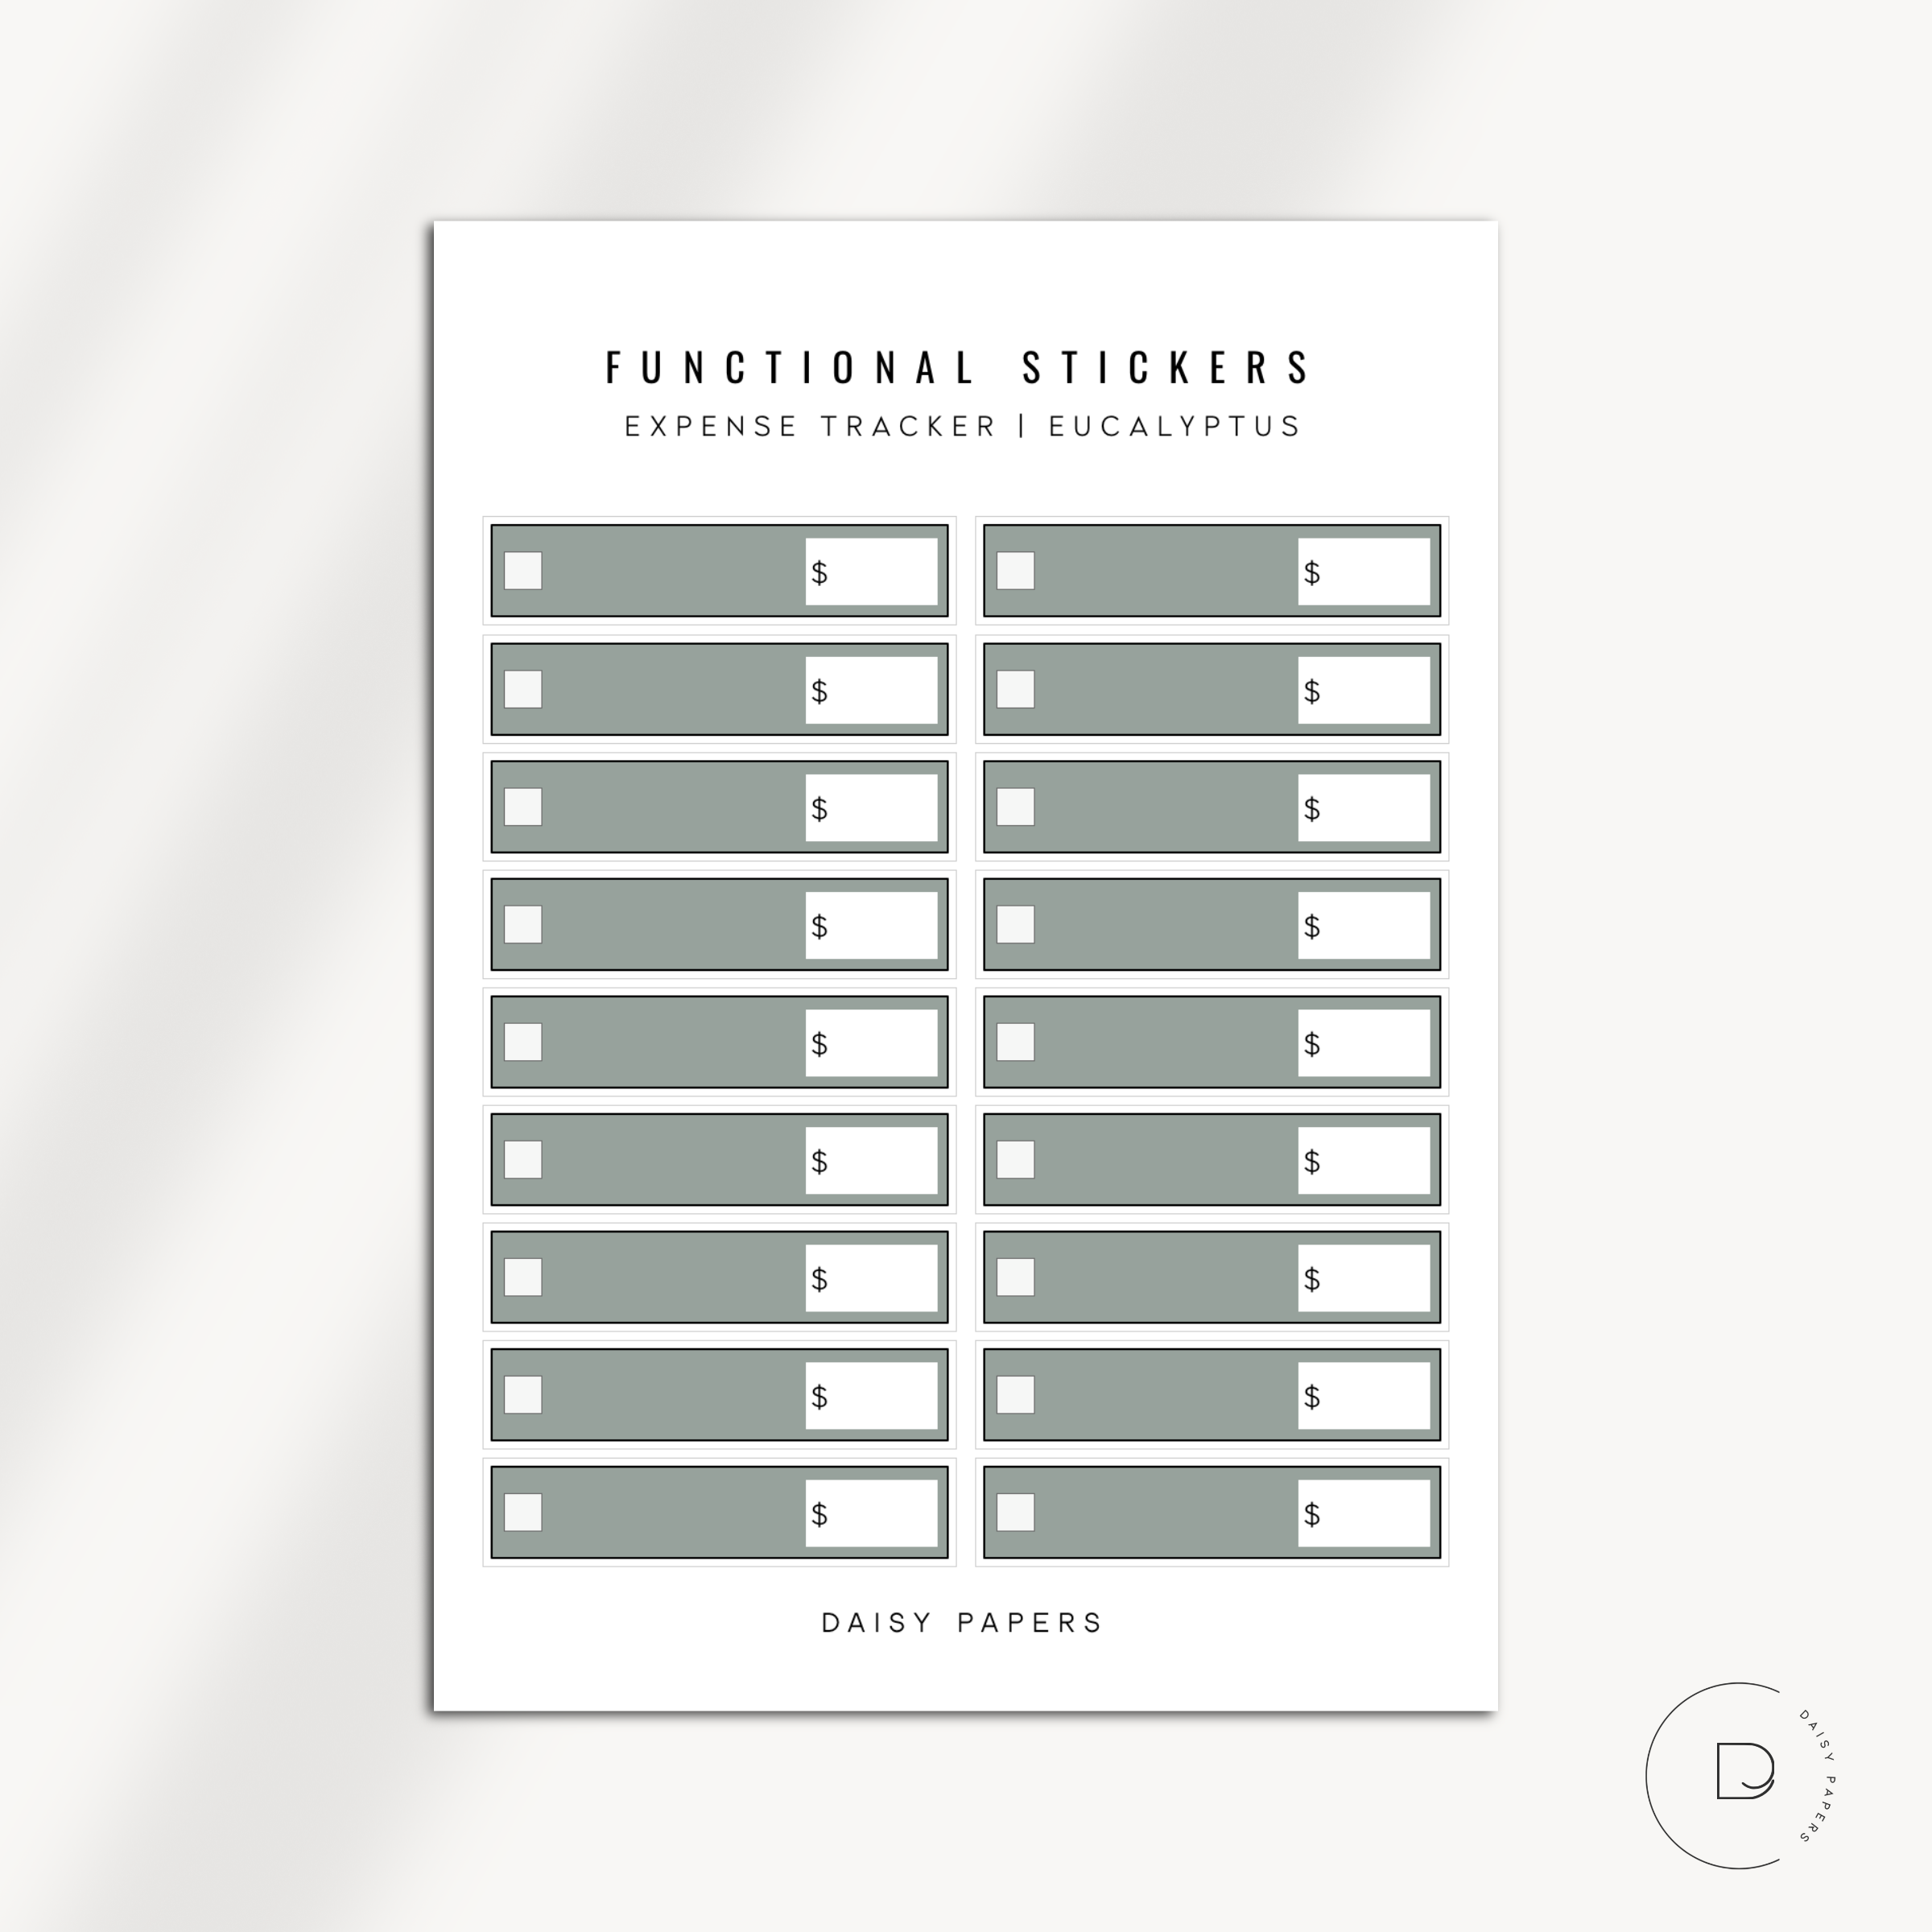 FUNCTIONAL STICKERS - EXPENSE TRACKERS